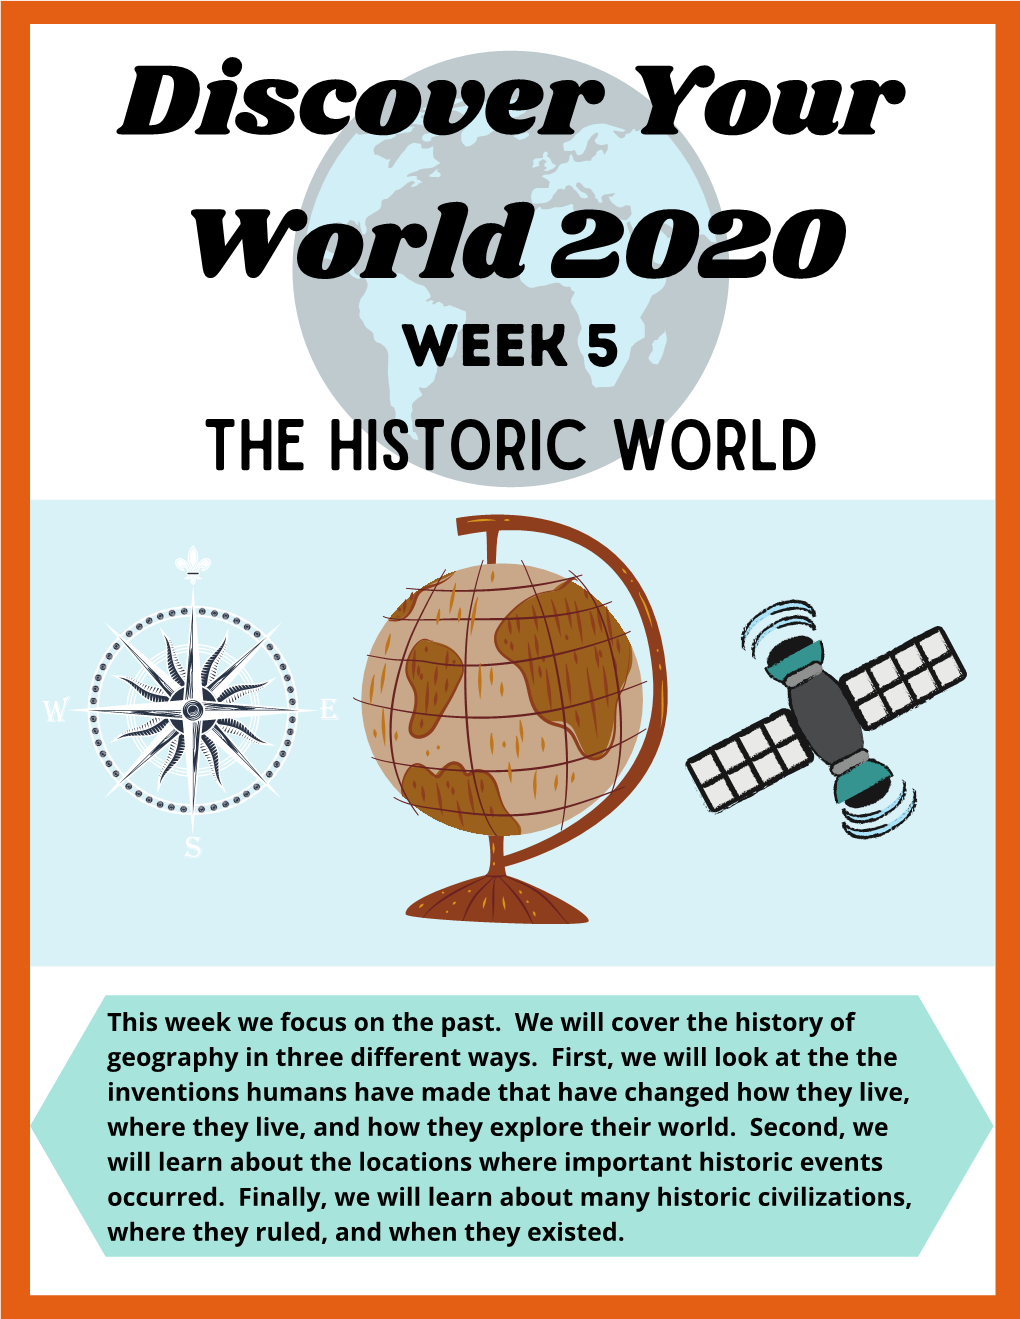 Discover Your World 2020 Week 5 the Historic World